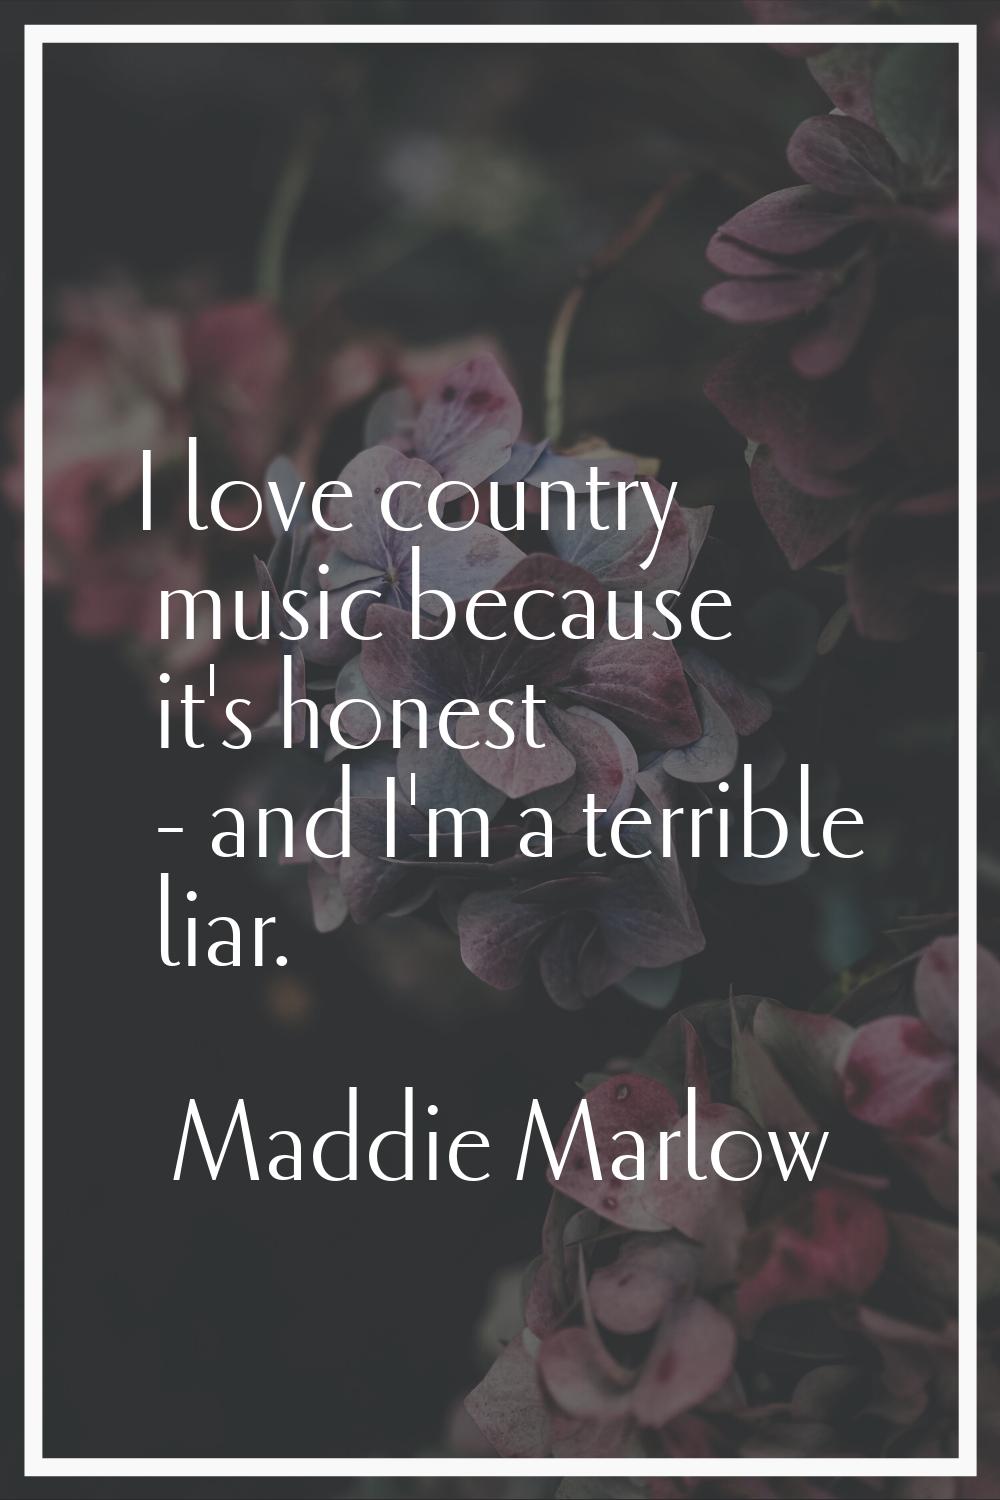 I love country music because it's honest - and I'm a terrible liar.